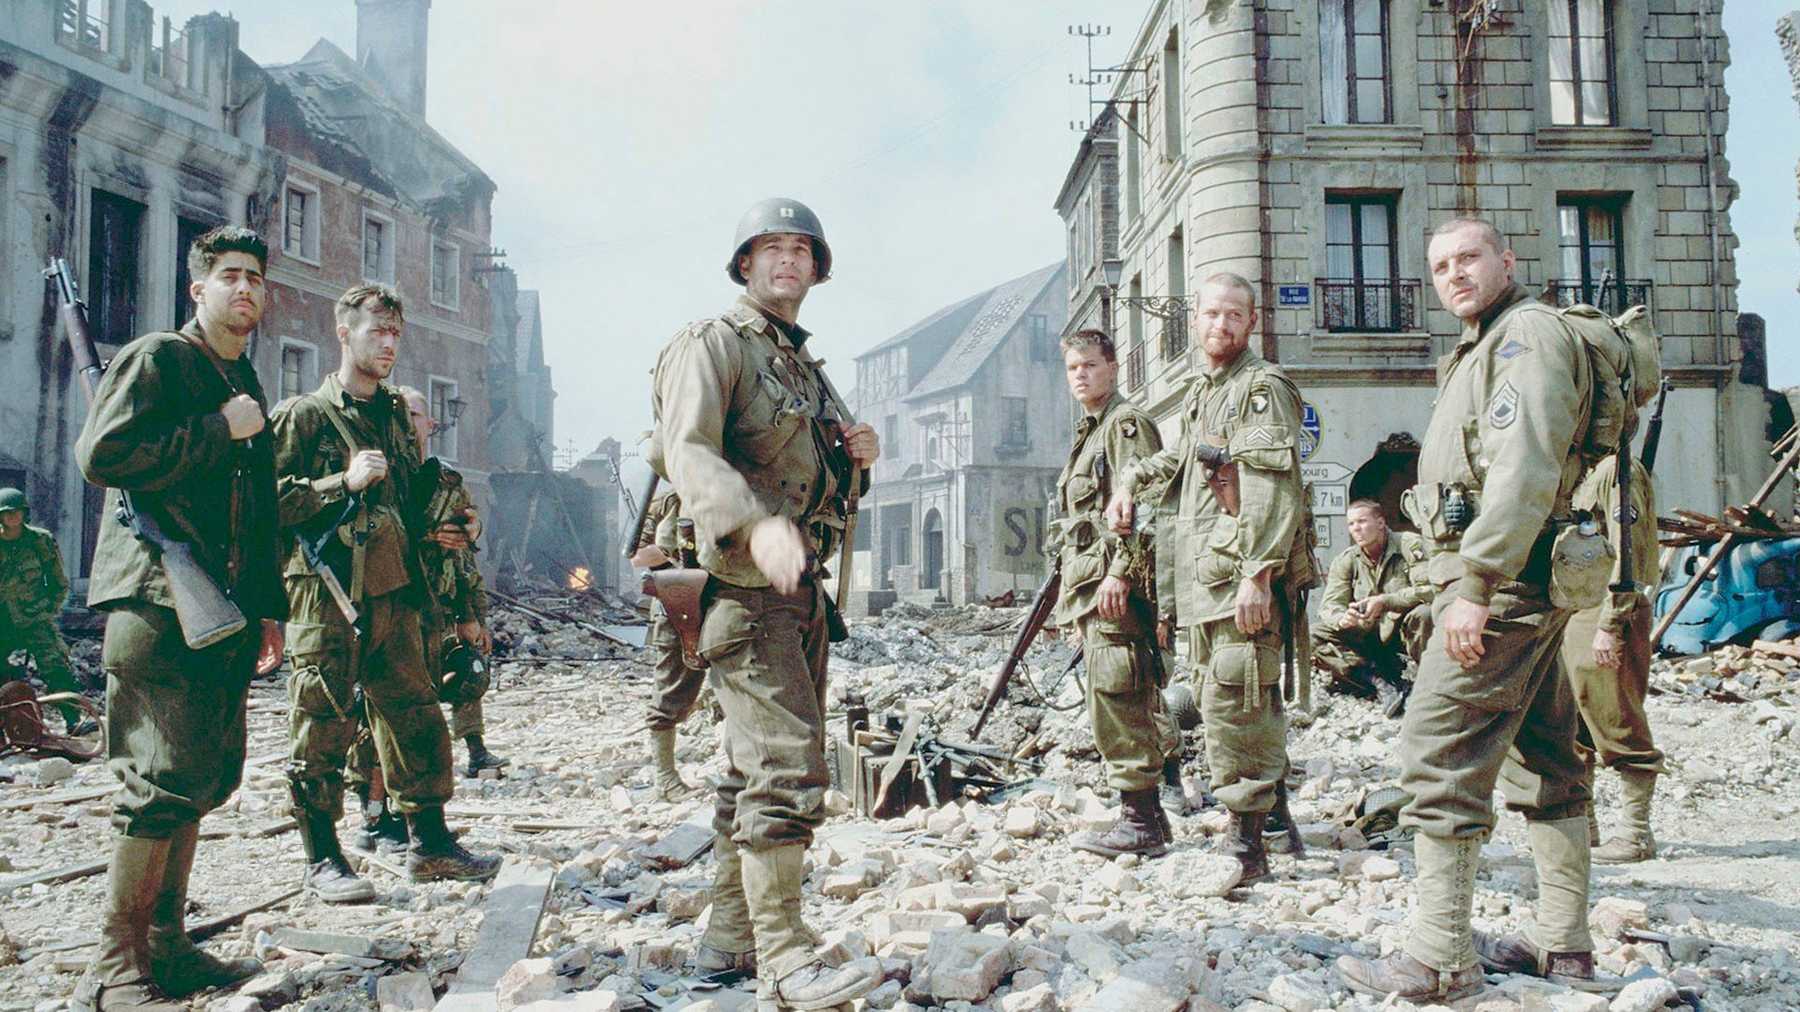 How Many of These Classic 90s Movies Can You Identify from Just One Image? Saving Private Ryan